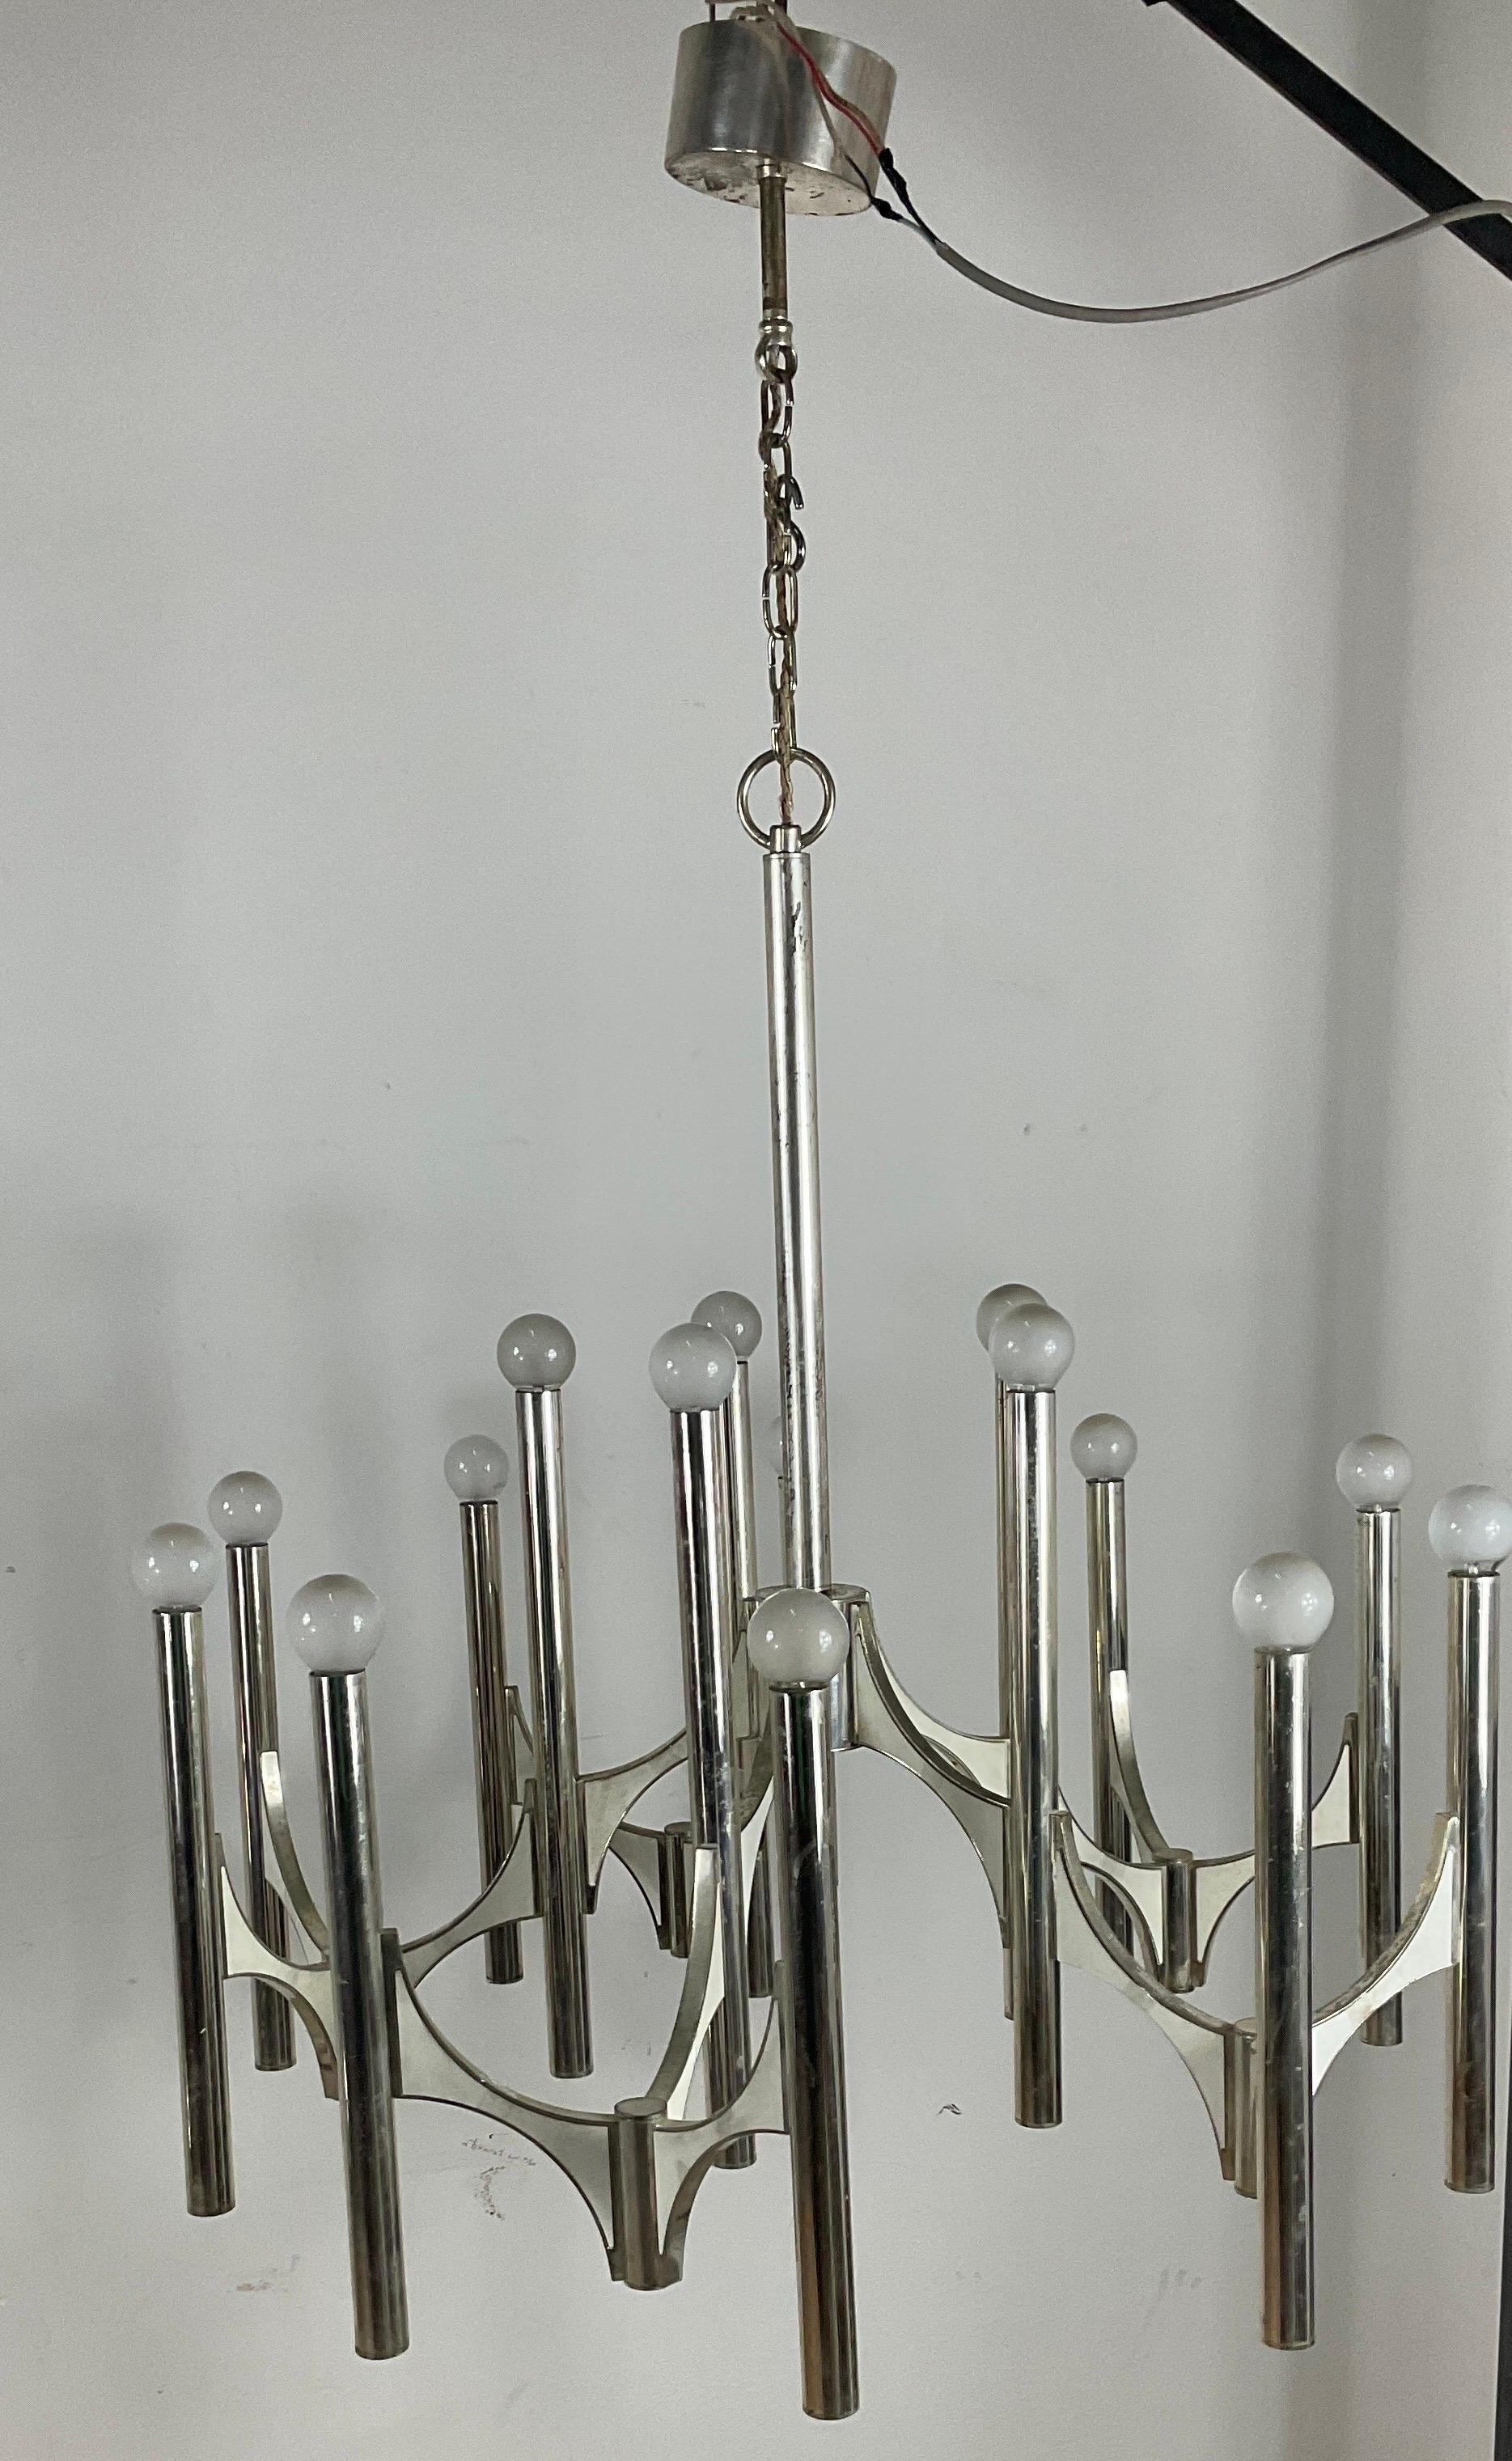 A modernist chandelier from the
• 60s, designed by Gaetano Sciolari for Lightoiler, Italy. Made from silver plated brass. The chandelier has 5 arms and offers fifteen light sources. A stunning combination of silvered vertical tubes and decorative